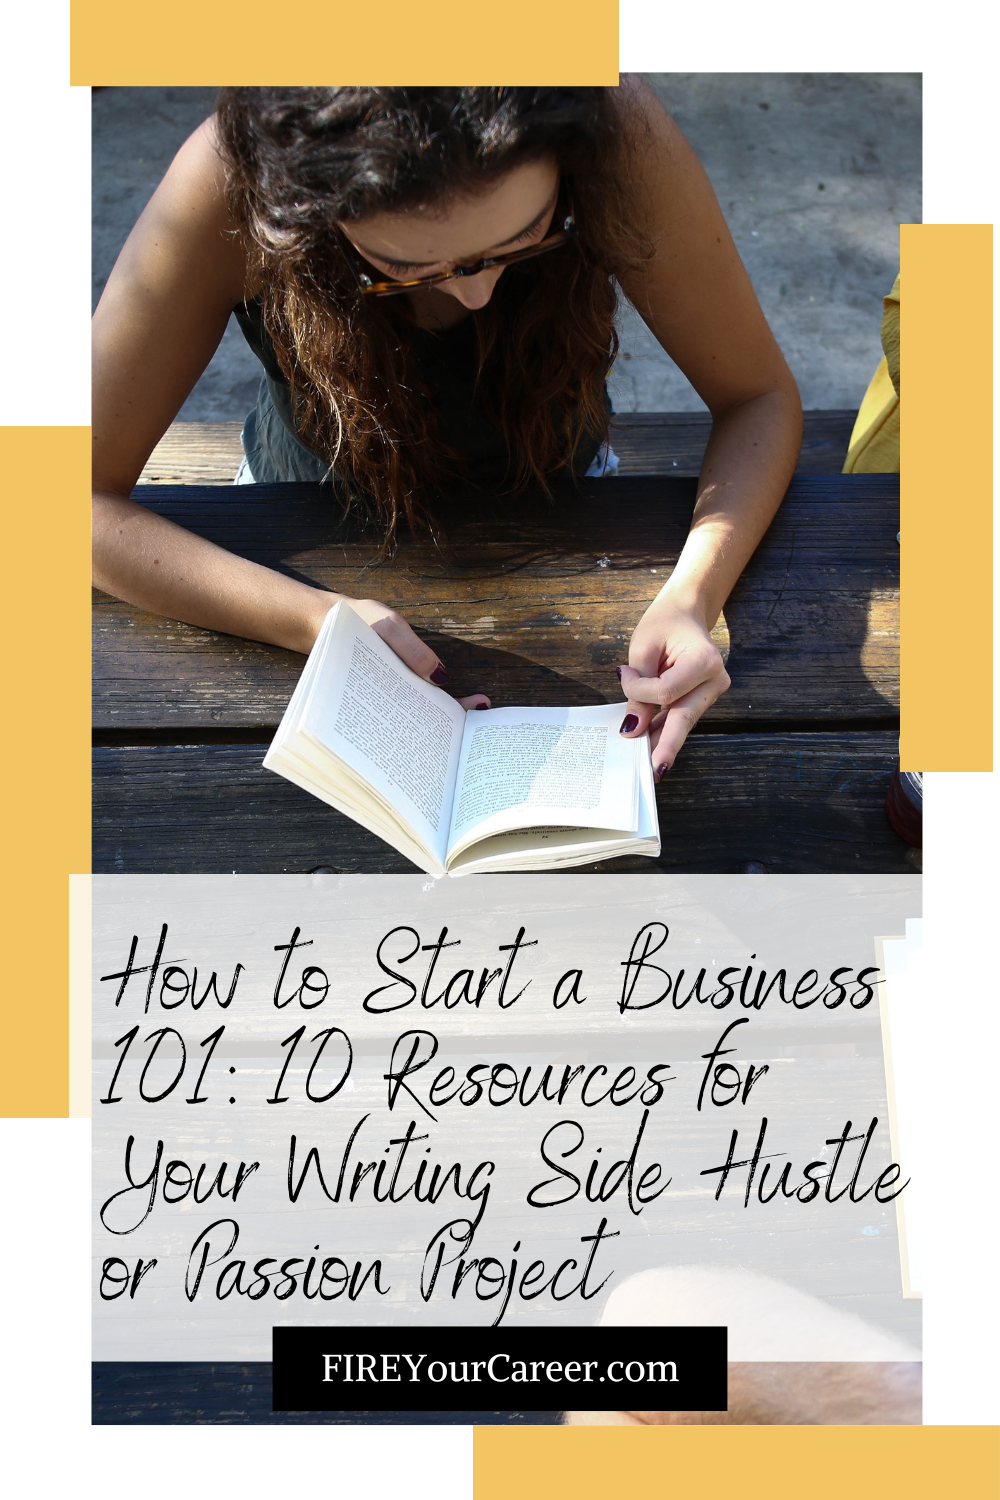 How to Start a Business 101 10 Resources for Your Writing Side Hustle or Passion Project Pinterest (1)